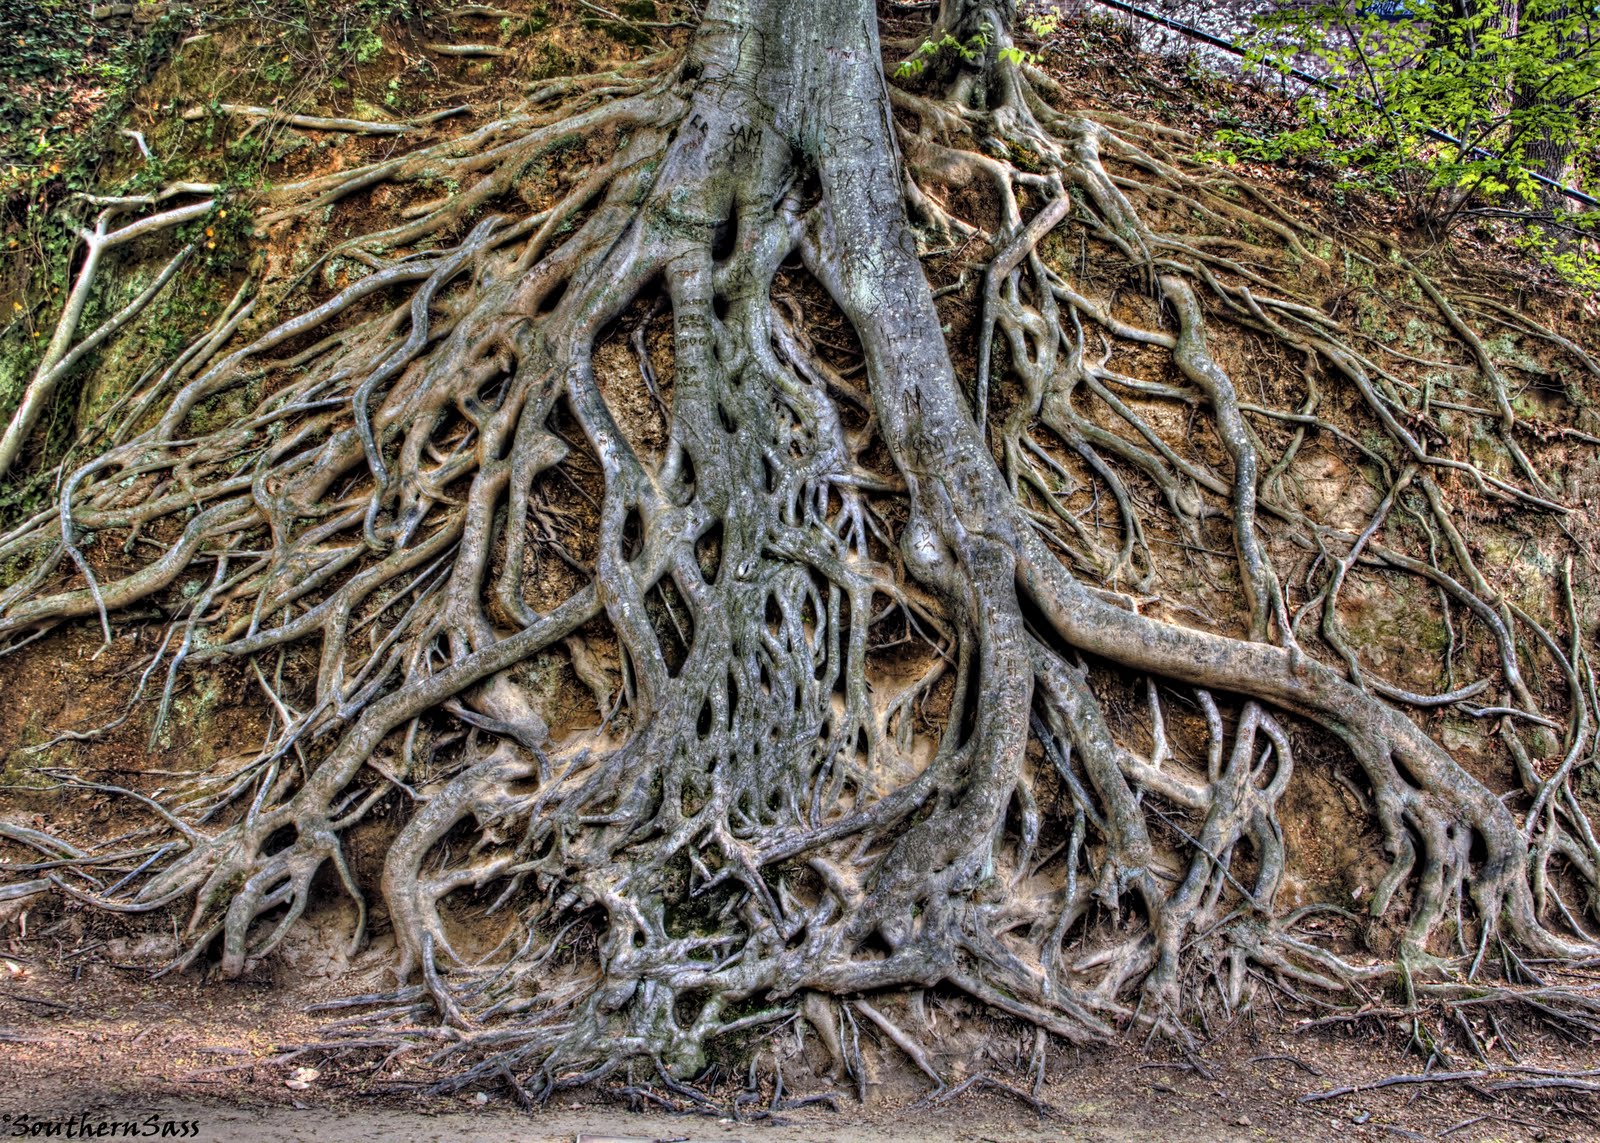 Its a Southern Thing: Roots in HDR